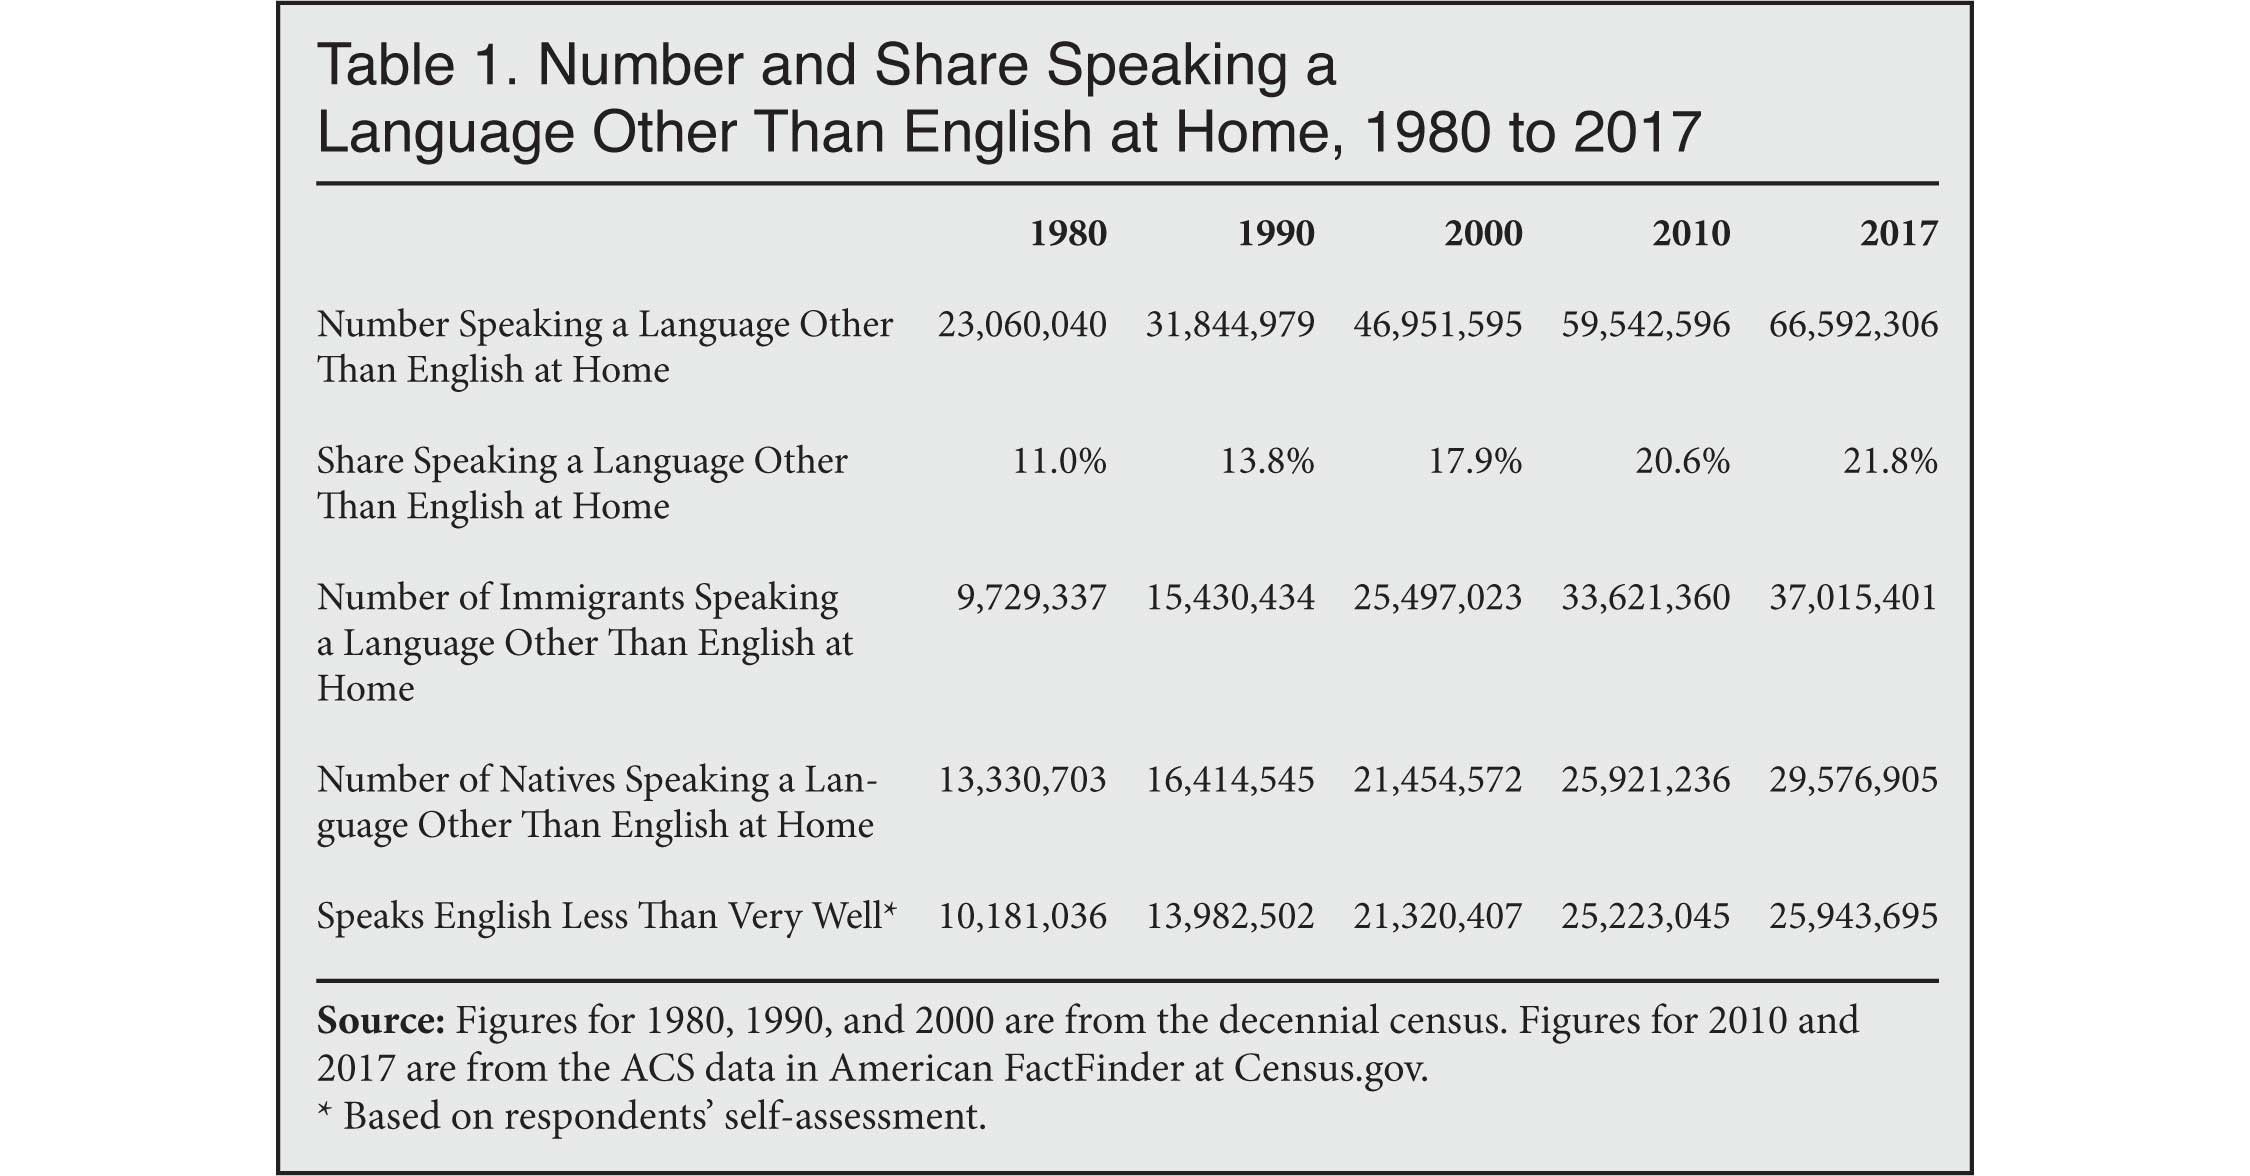 Table: Number and Share Speaking a Language Other Than English at Home, 1980 to 2017